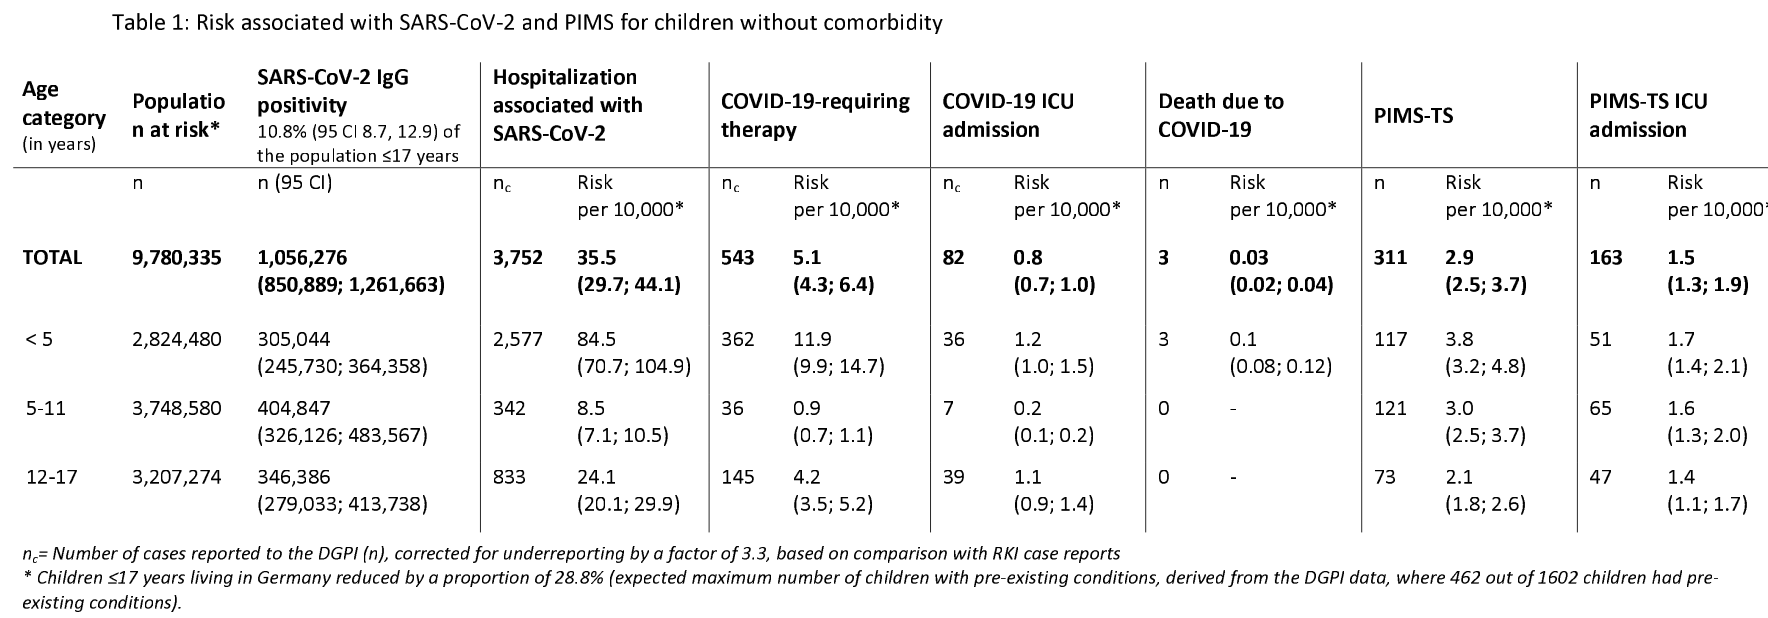 Tabel showing risk associated with SARS-CoV-2 and PIMS for children without comorbidity